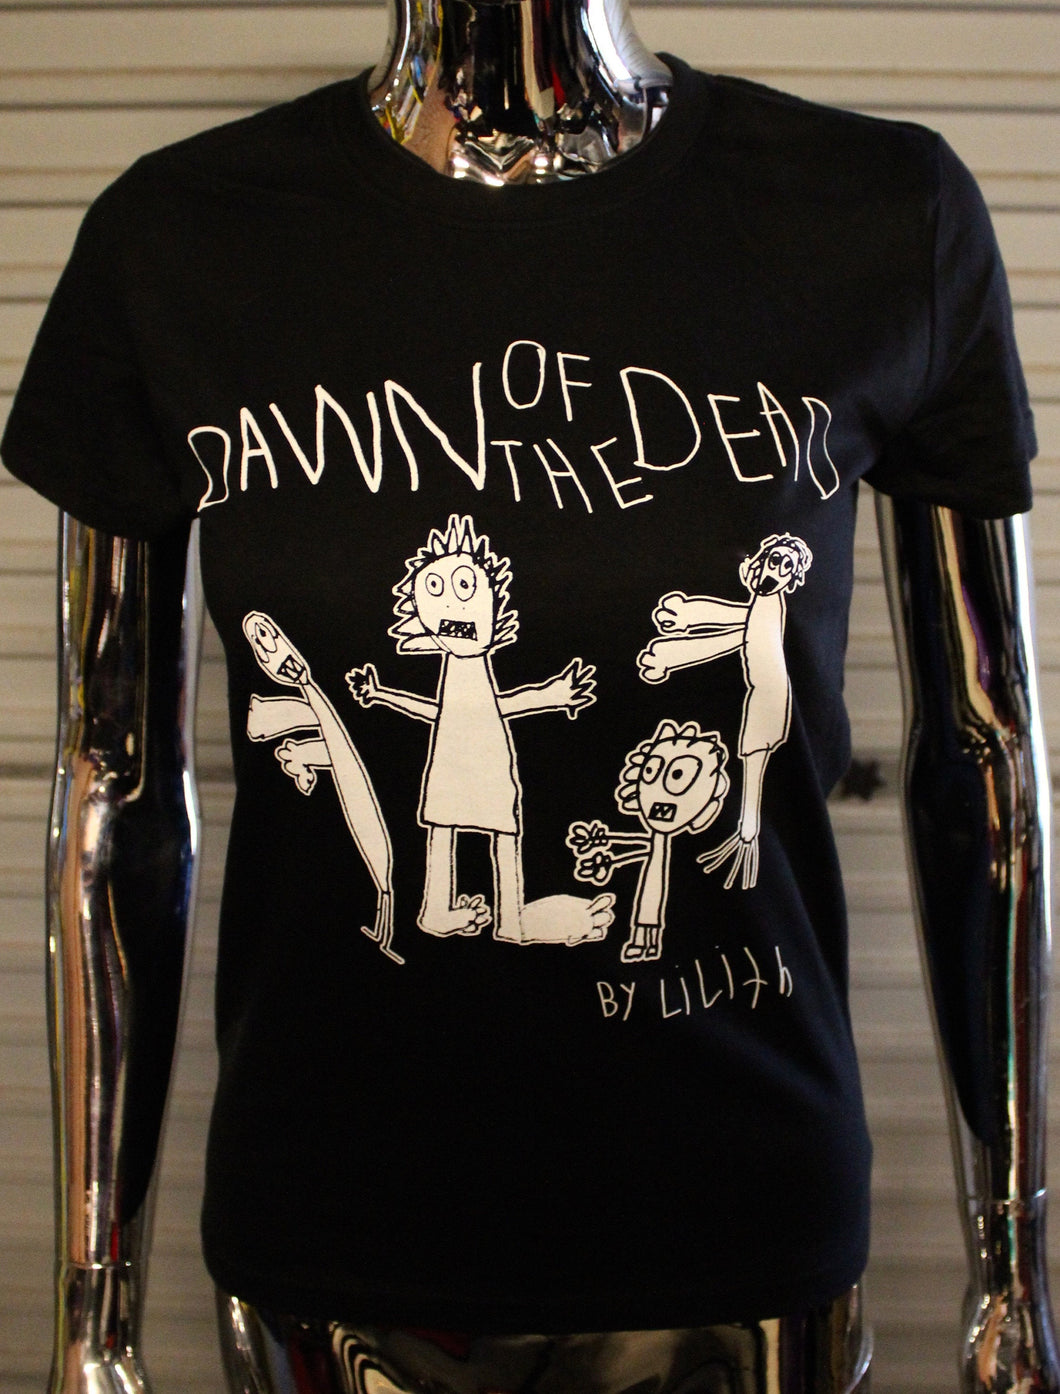 Women's Dawn Of The Dead by Lilith T-shirt